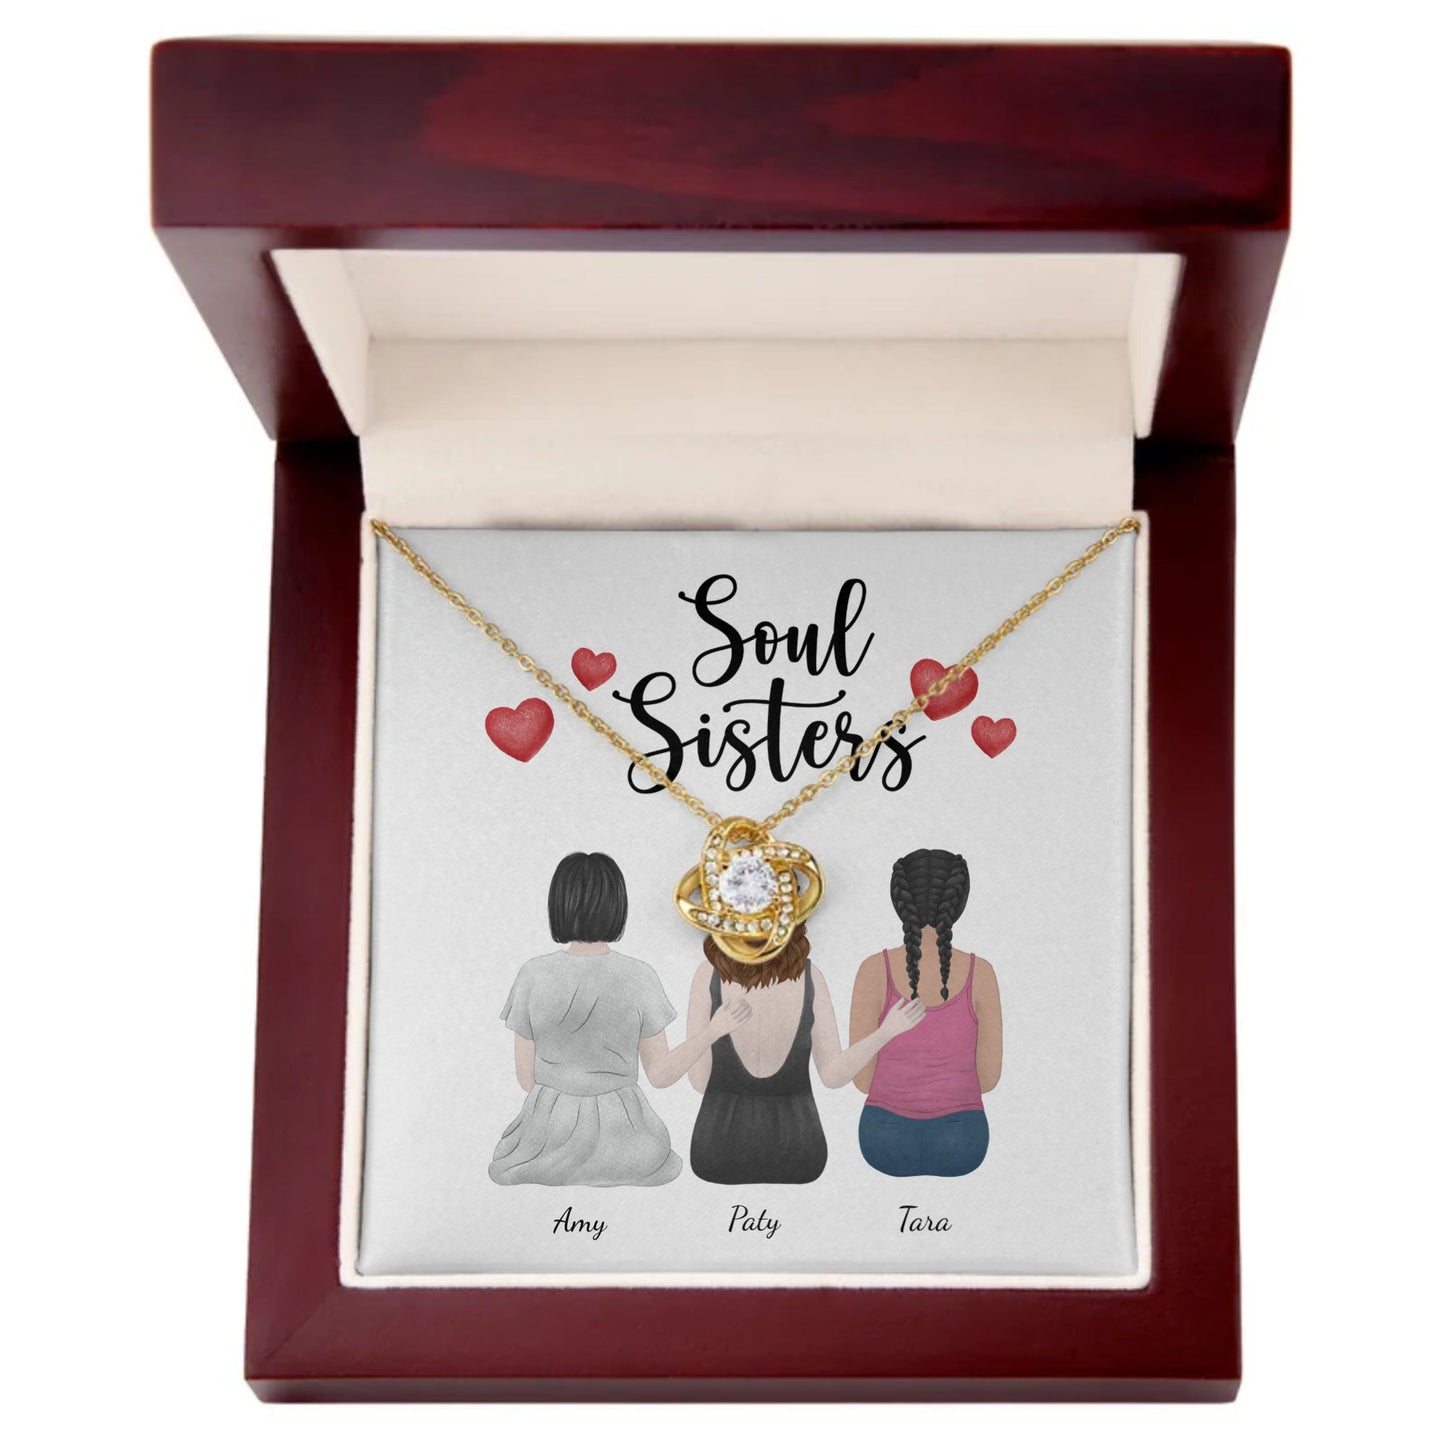 Soul sisters - To Best Friends or Bridesmaids - CUSTOMIZE IT - Love Knot Necklace